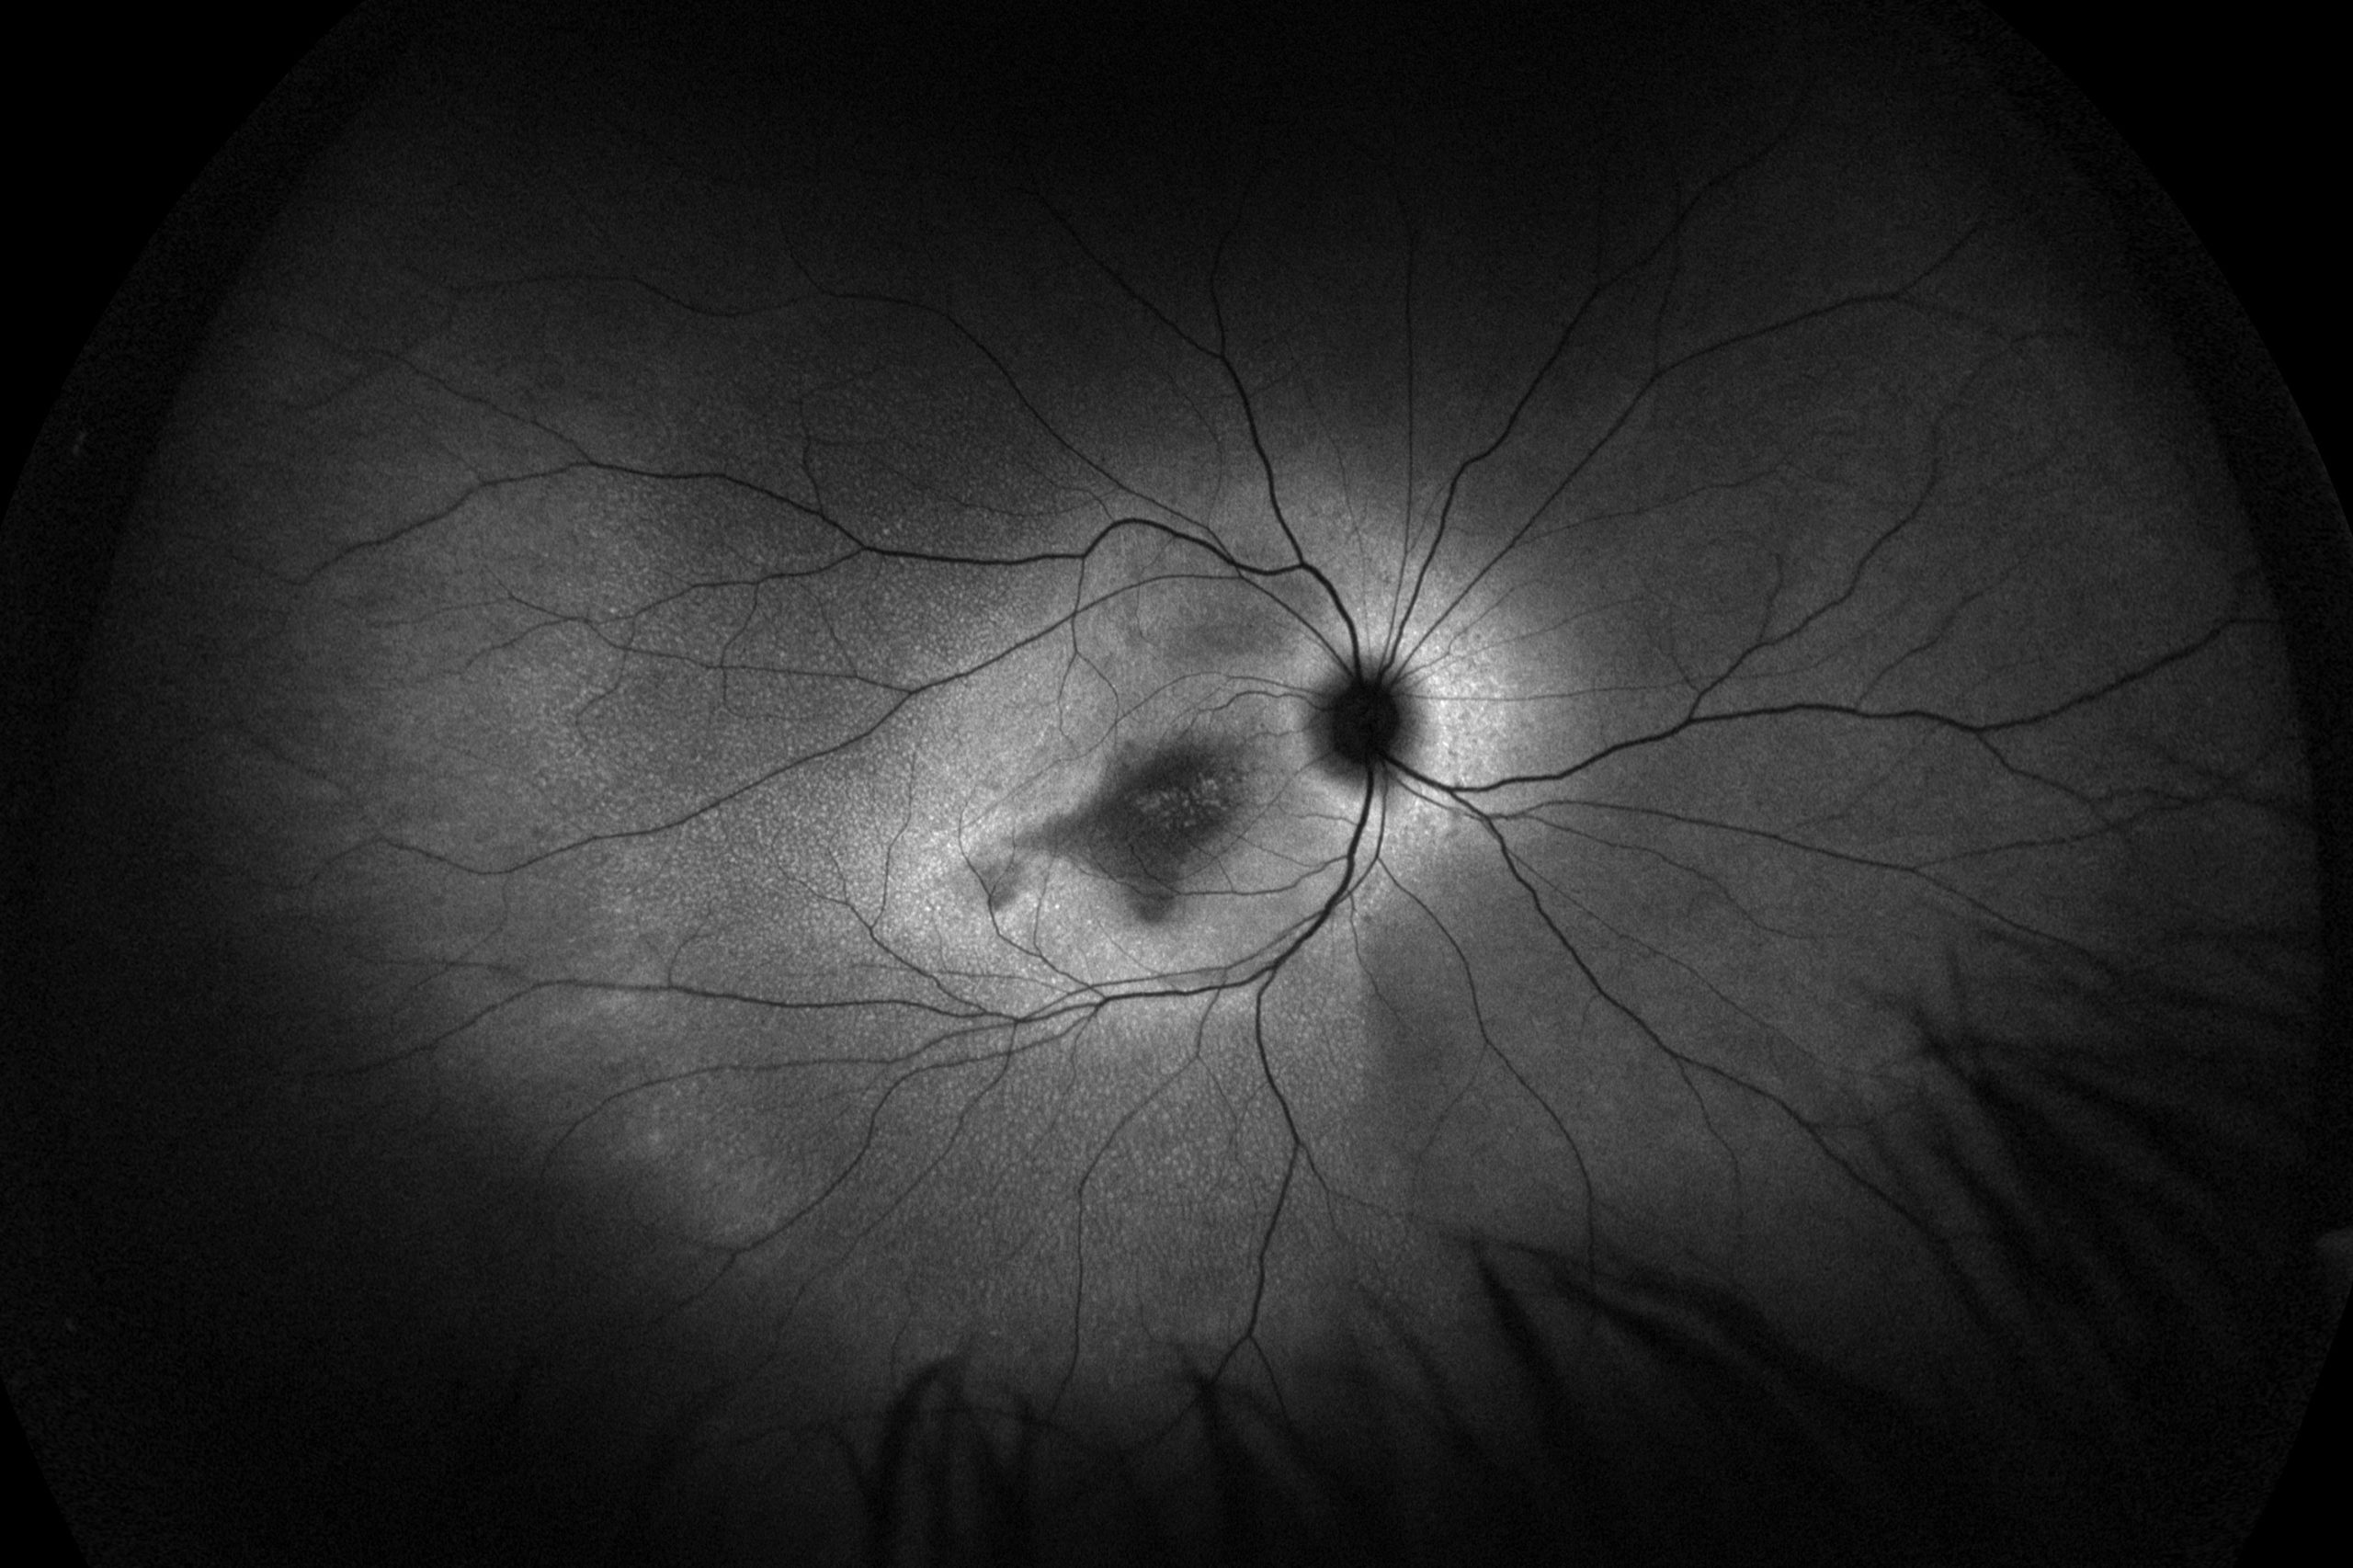 Macular Dystrophy scaled